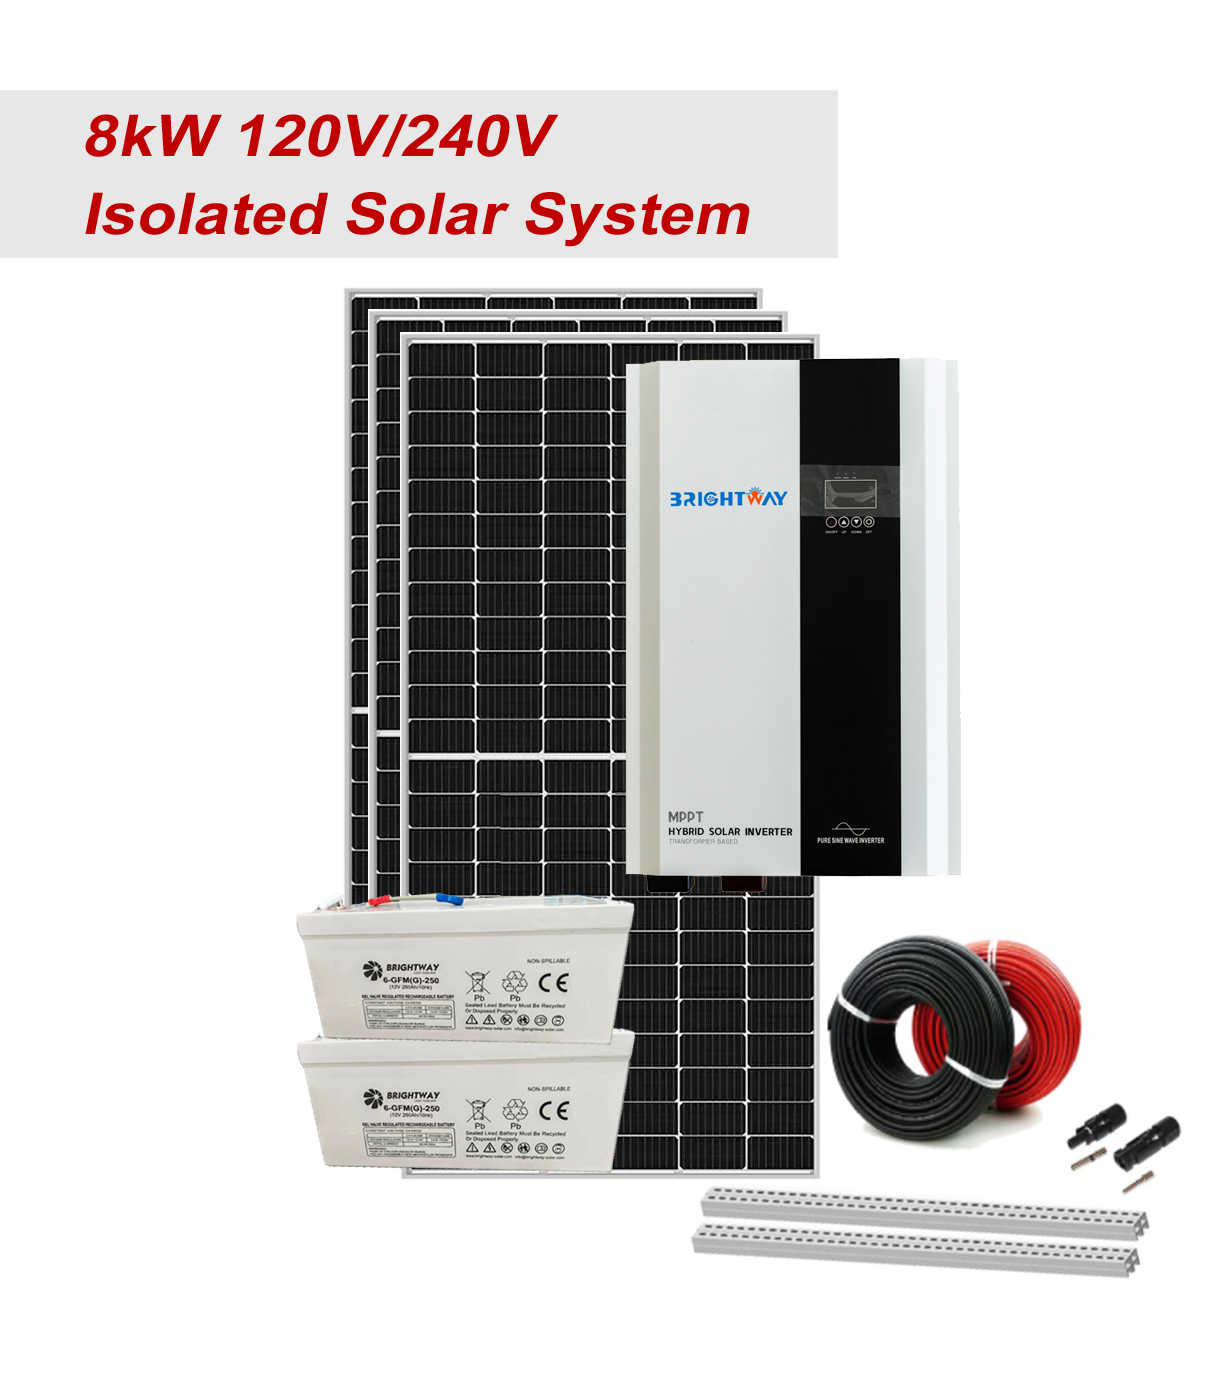 Solar off Hybrid System for Home Or Farm Use 8kW 24kWh battery storage 500W solar panel